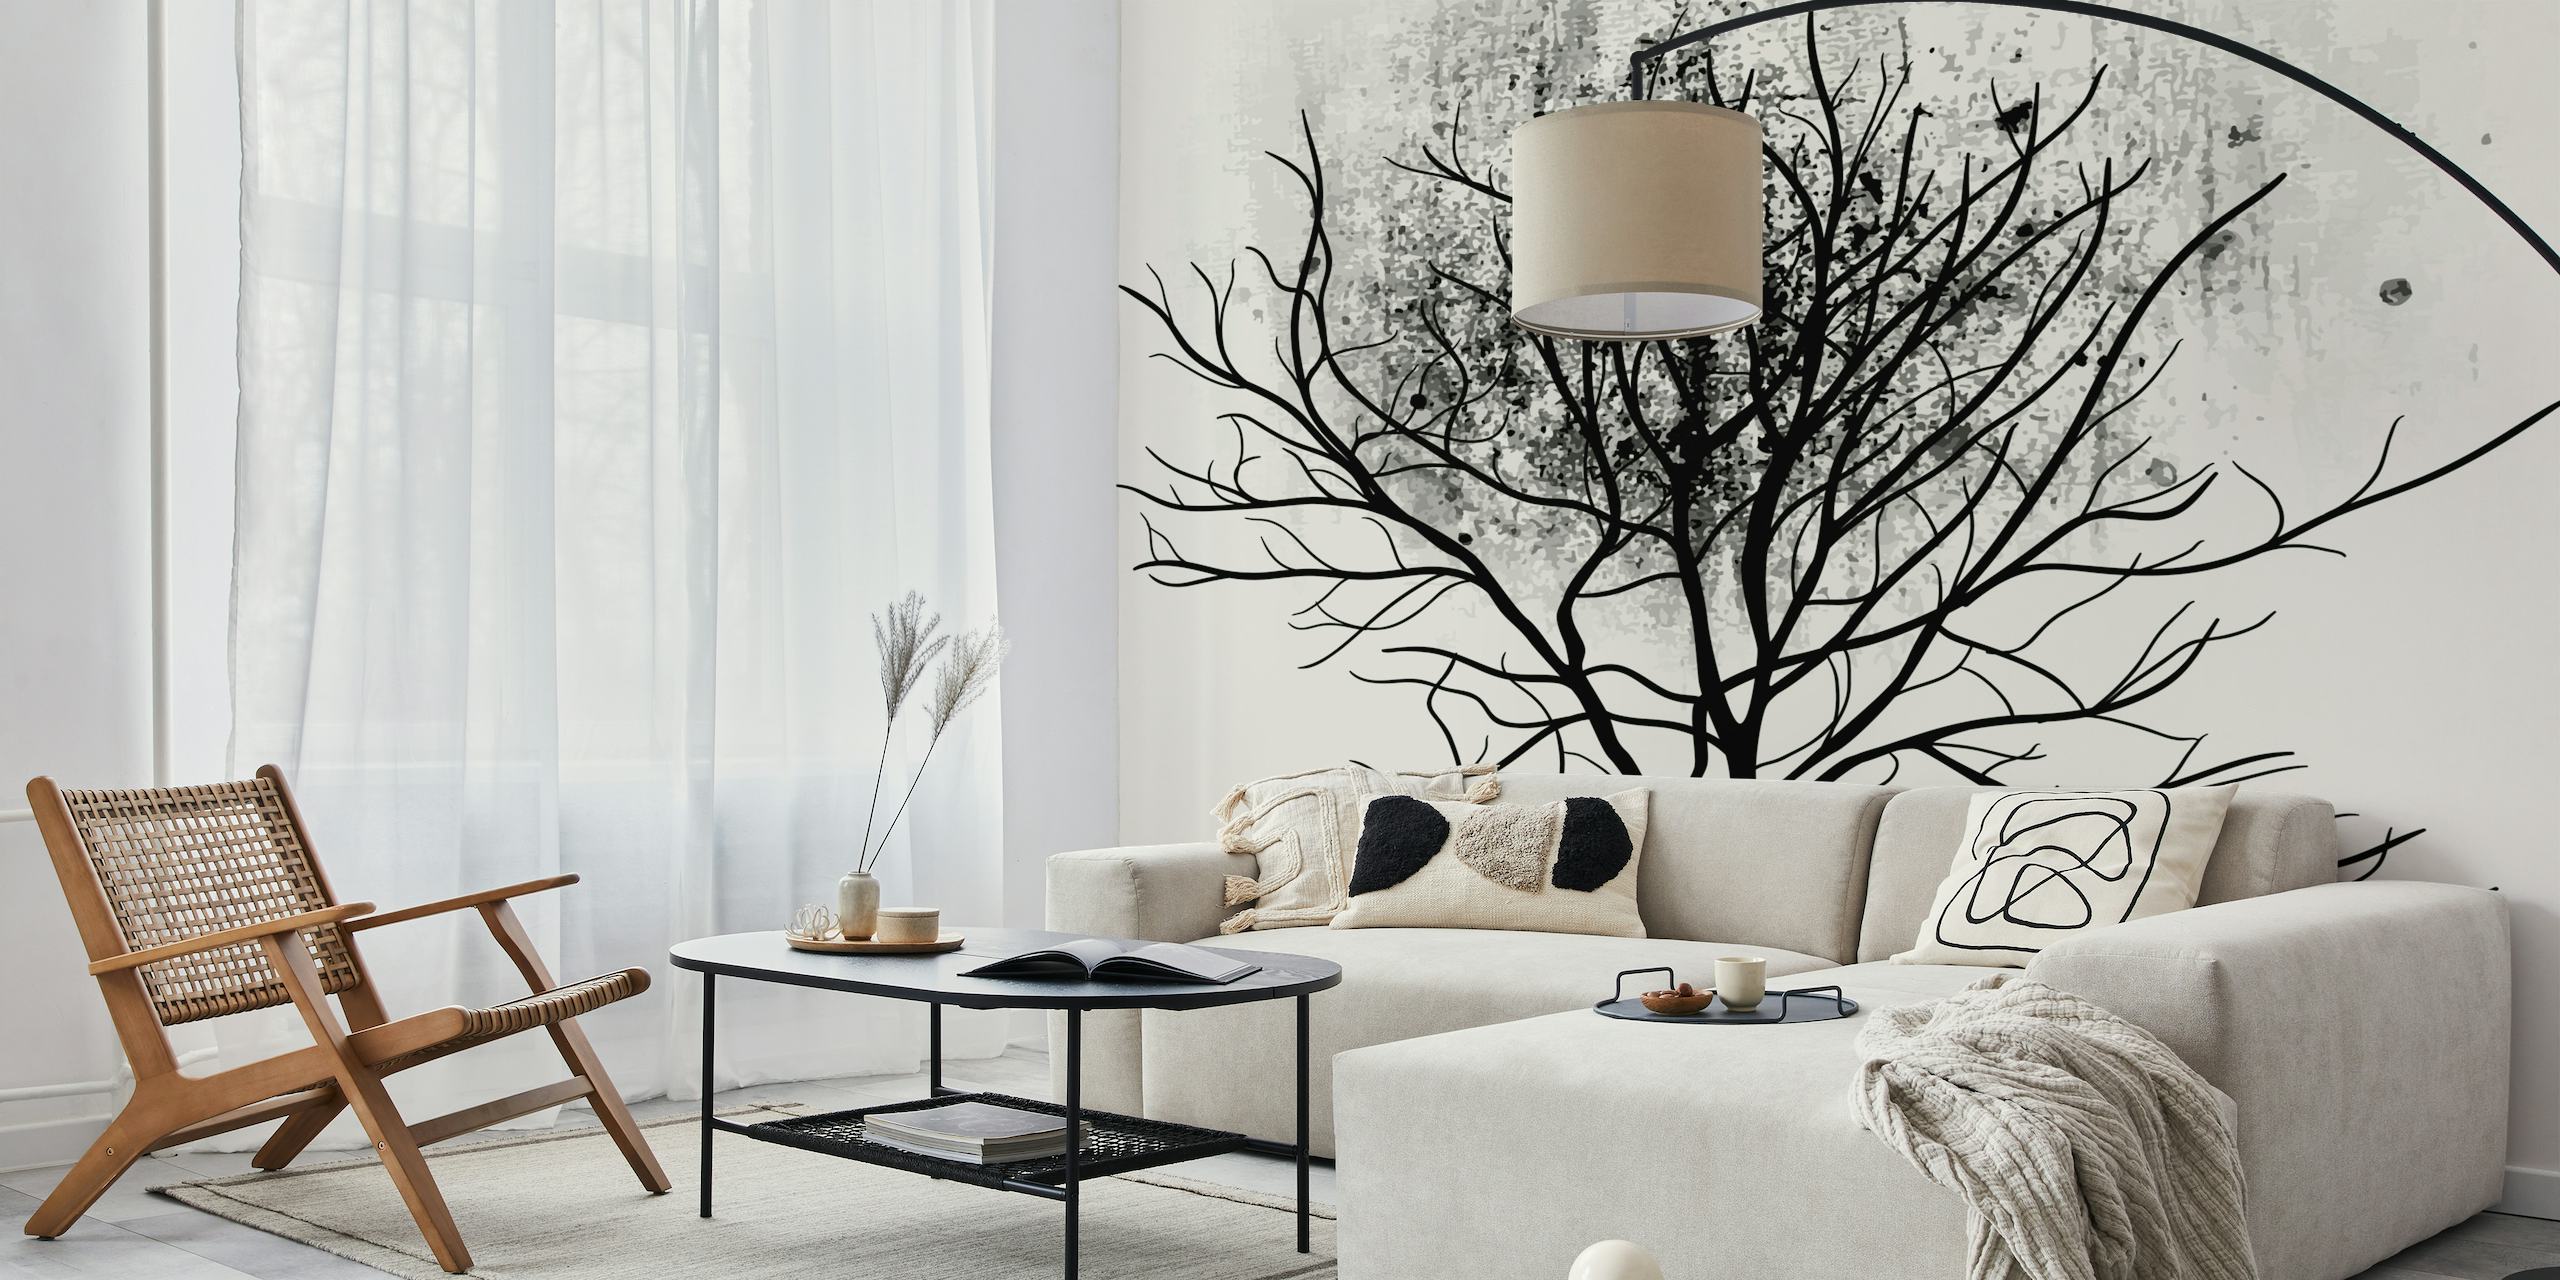 Monochrome wall mural of a dark oak tree silhouette on a textured grey background for modern interior decor